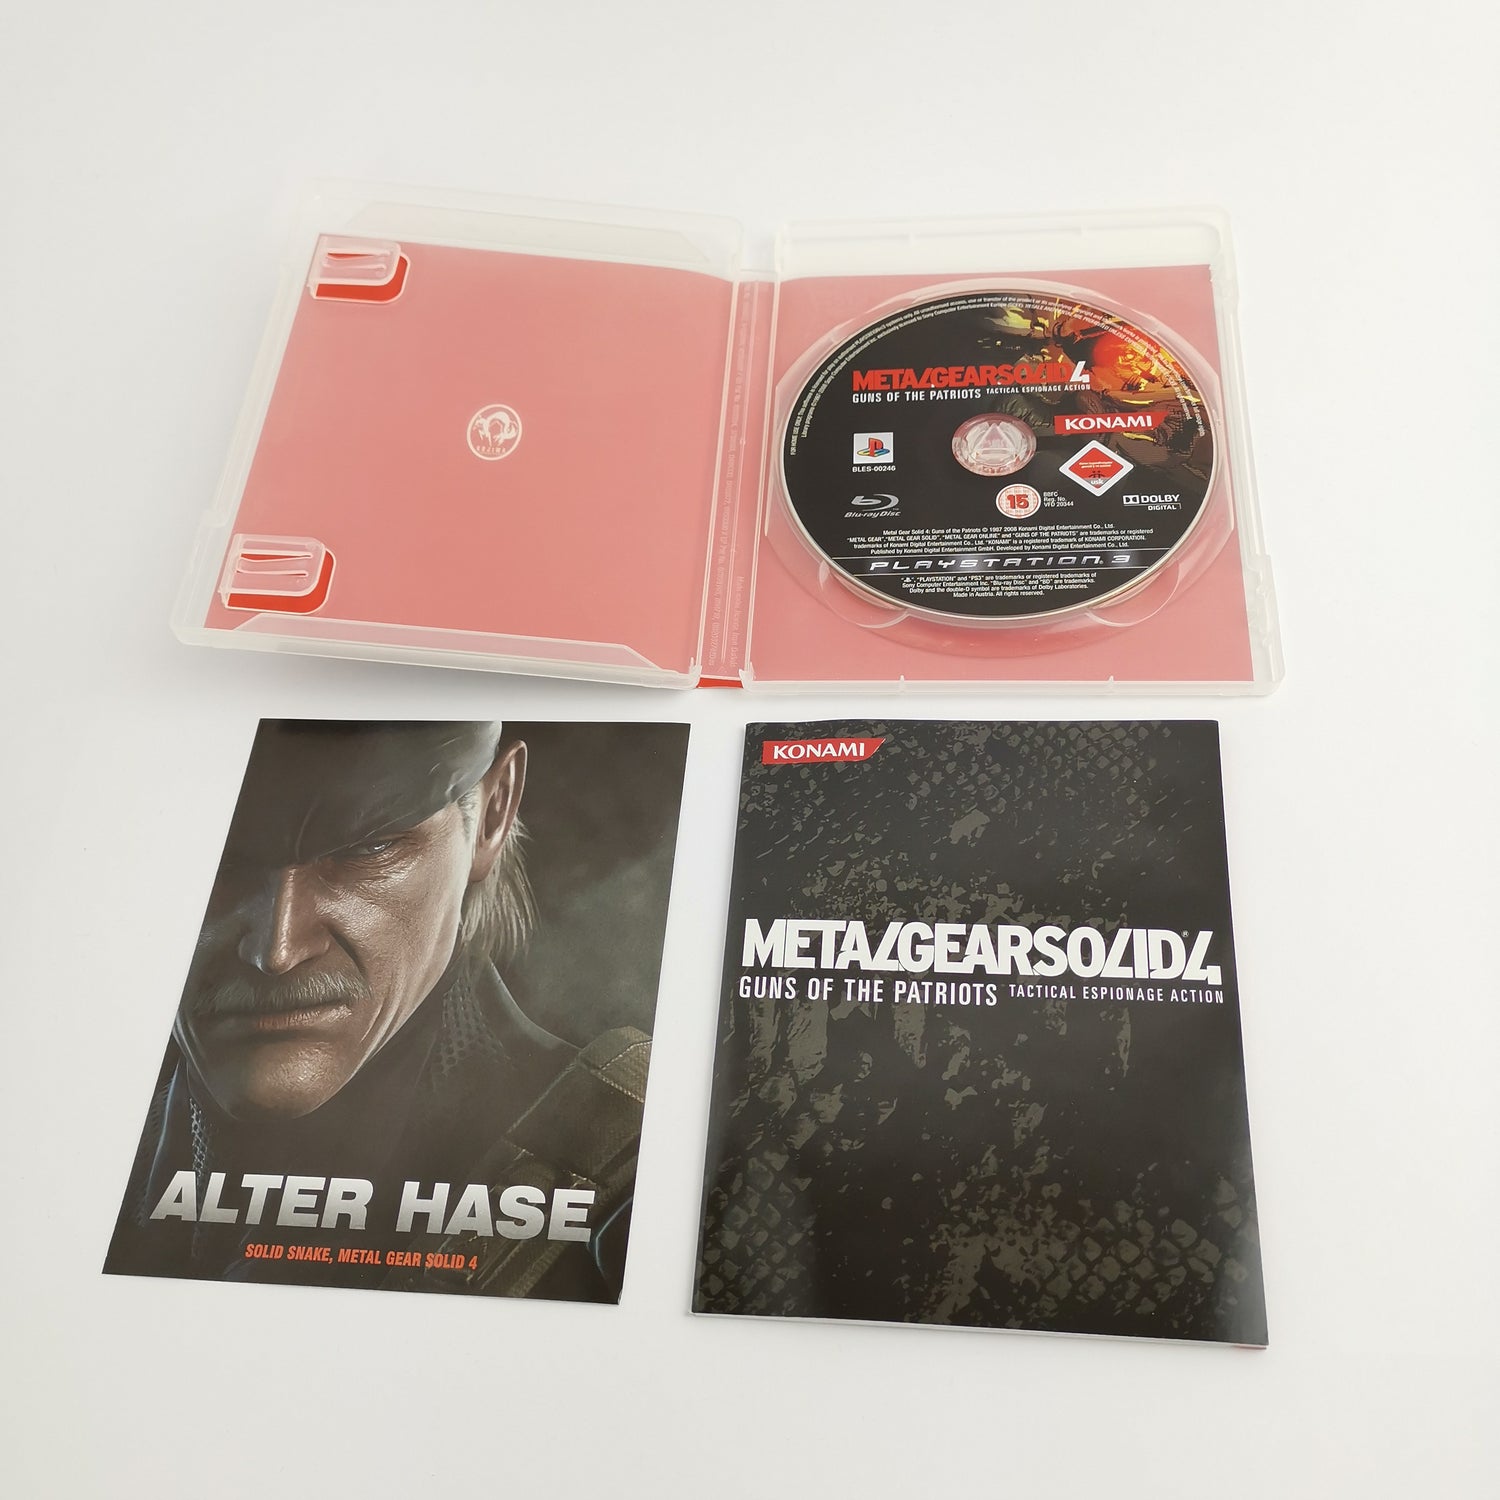 Sony Playstation 3 Game: Metal Gear Solid Guns of the Patriots | PS3 original packaging USK18